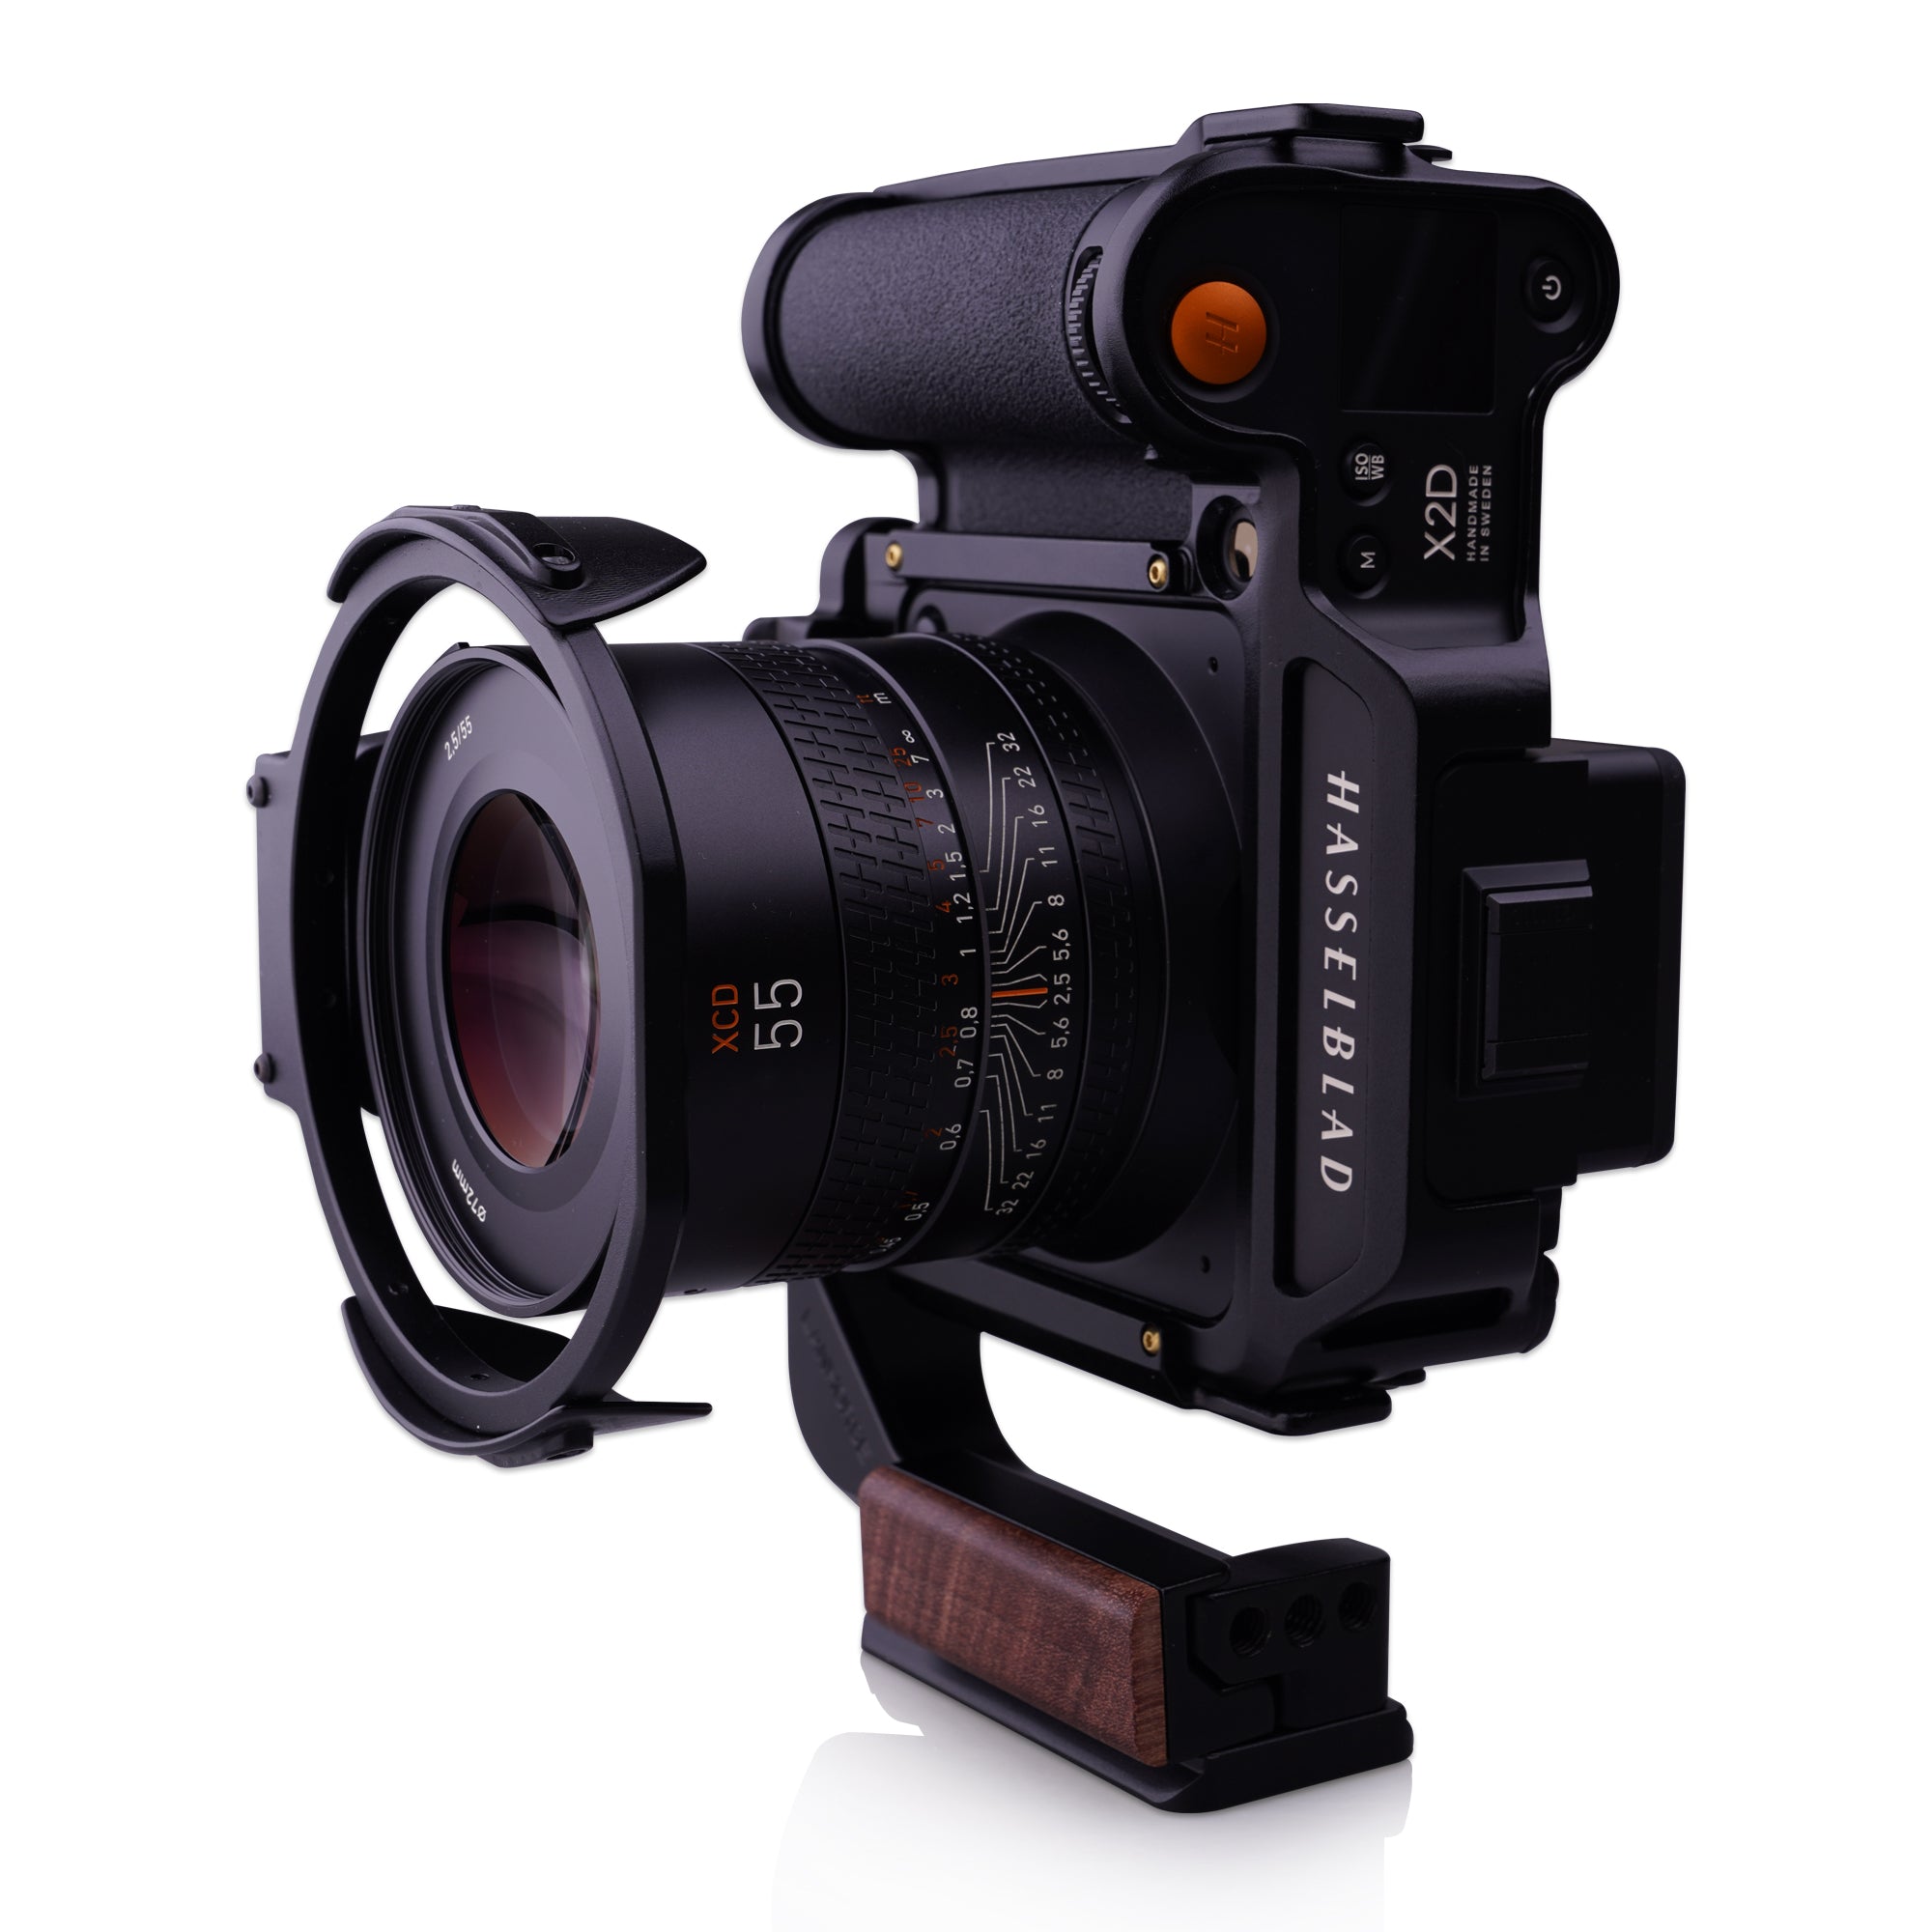 Lanhorse Modular Cage and Portrait Quick-lease for Hasselblad X2D 100C, Lens Protector Frame Options.